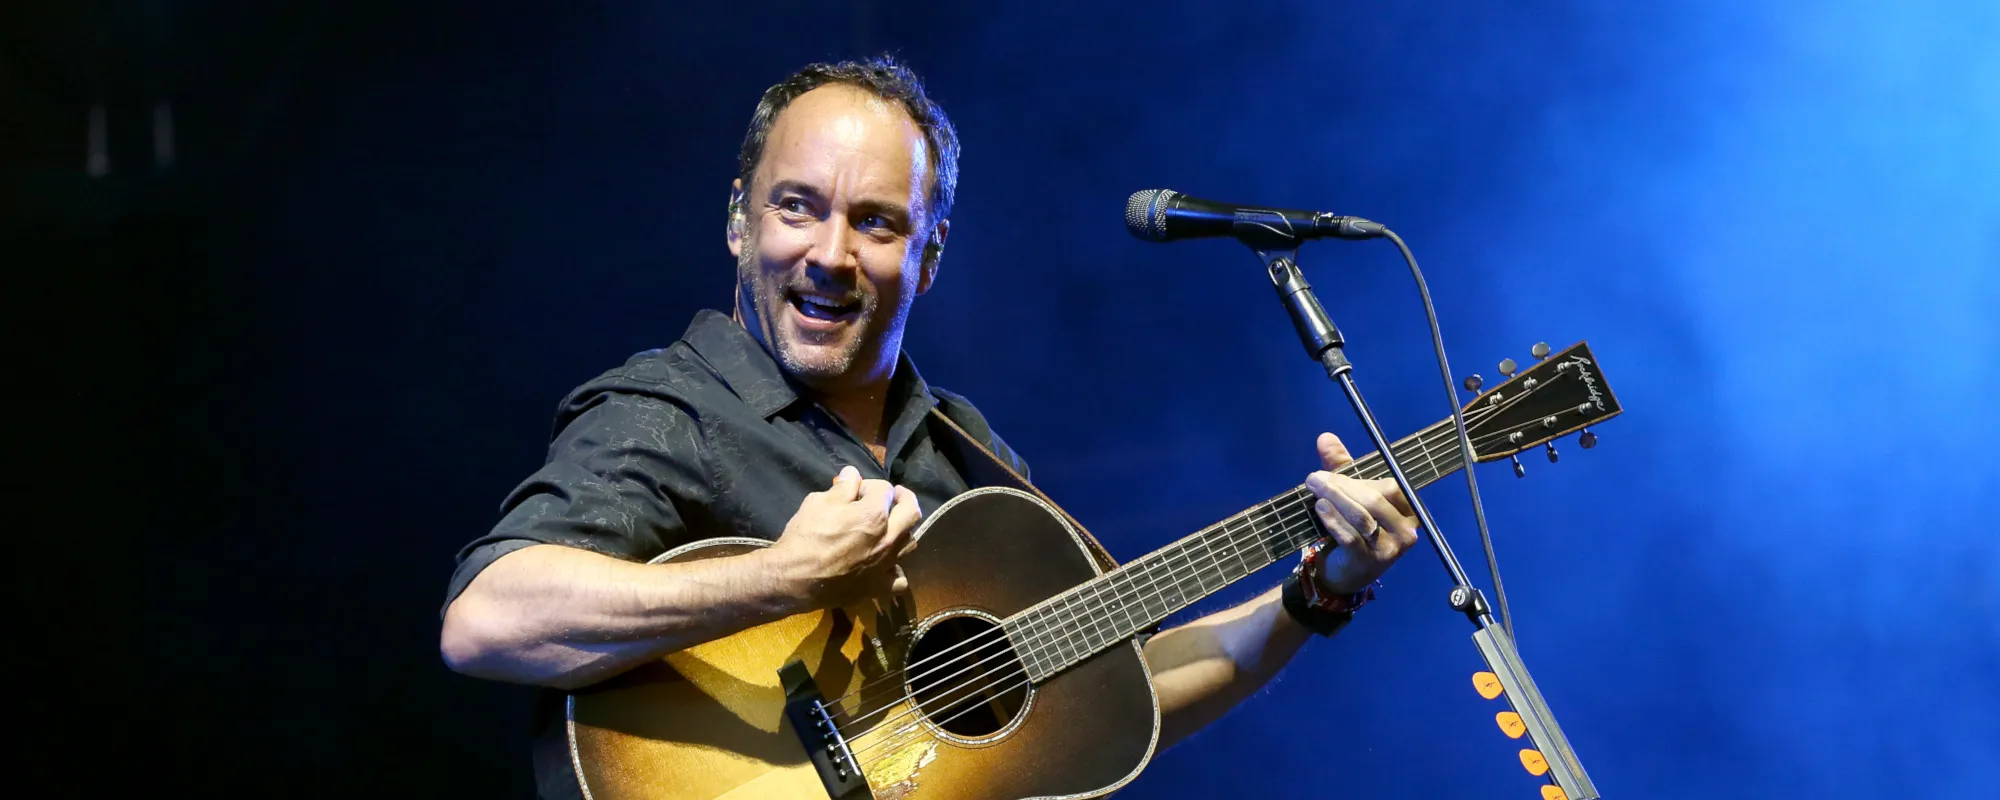 Meaning Behind the Song: “#41” by Dave Matthews Band